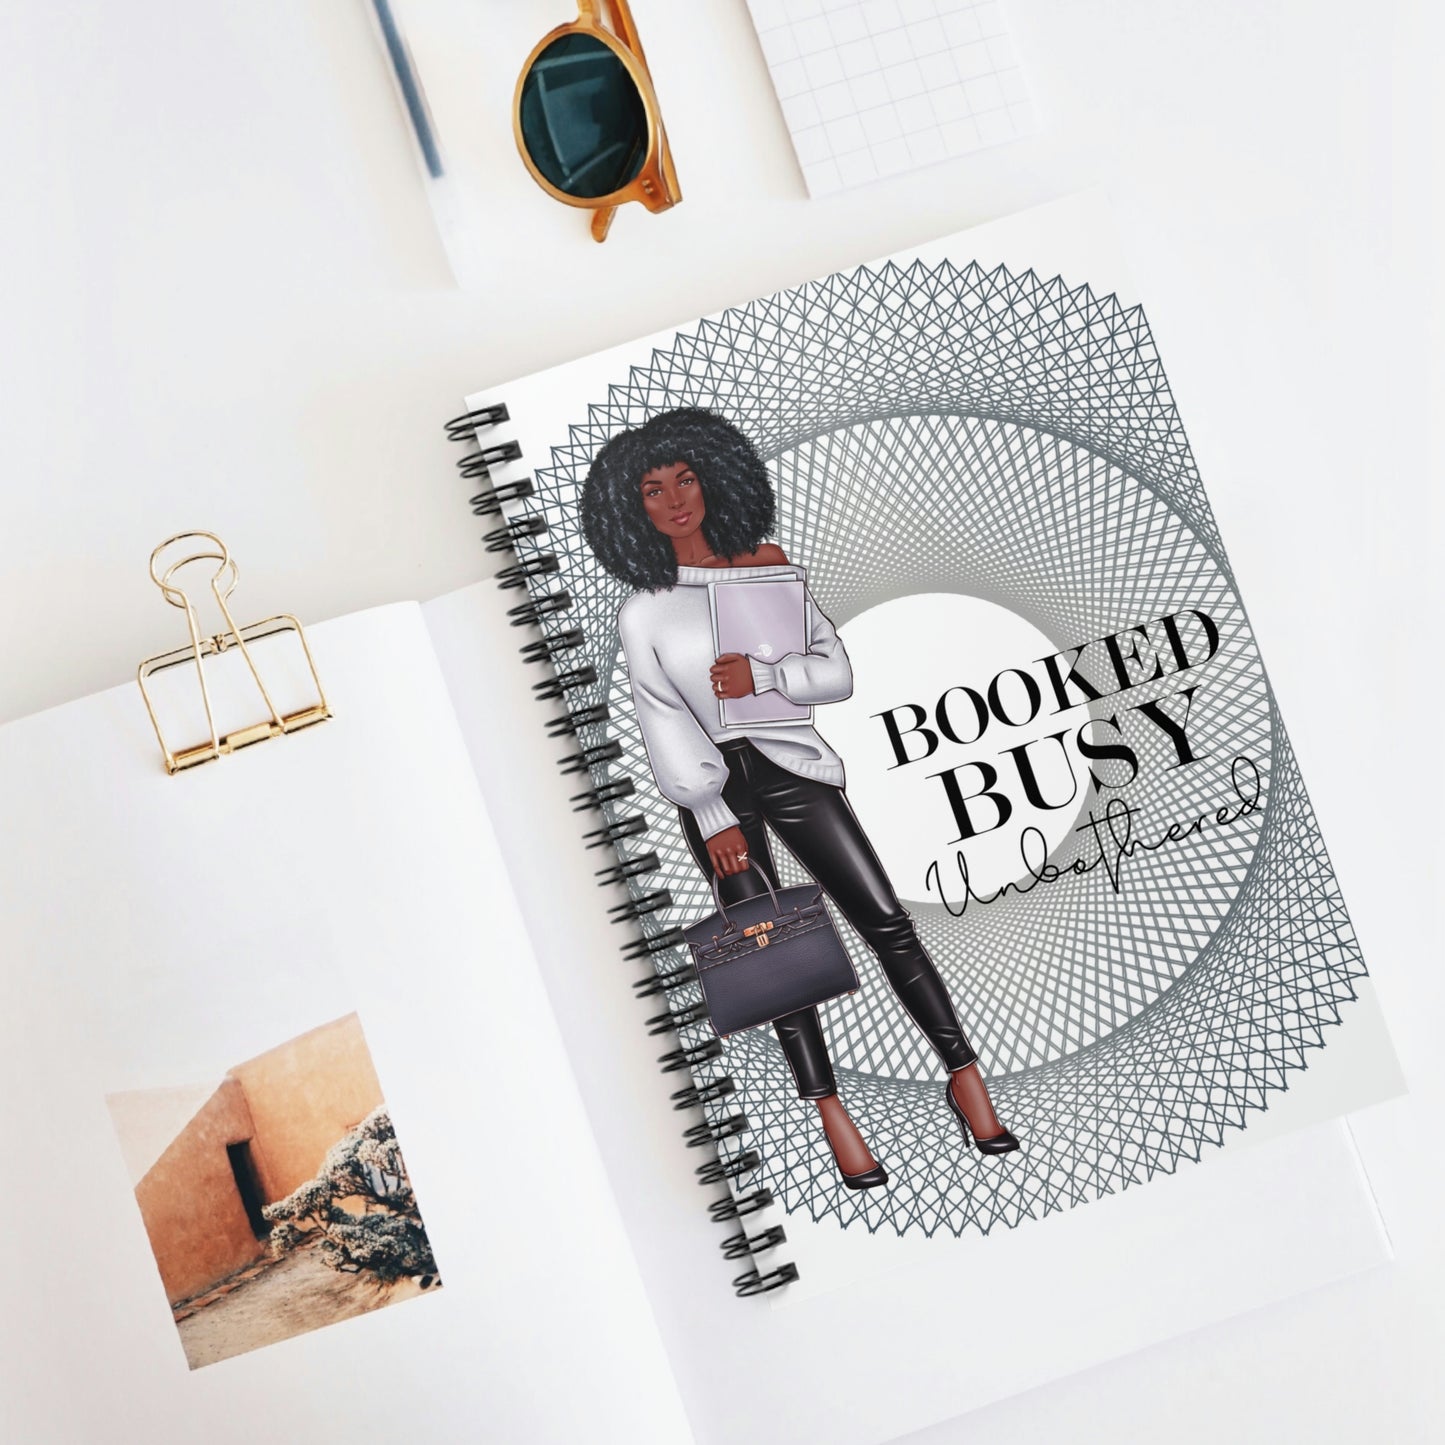 Booked, Busy, Unbothered (African American) (Silver Spiral Cover) Spiral Notebook - Ruled Line